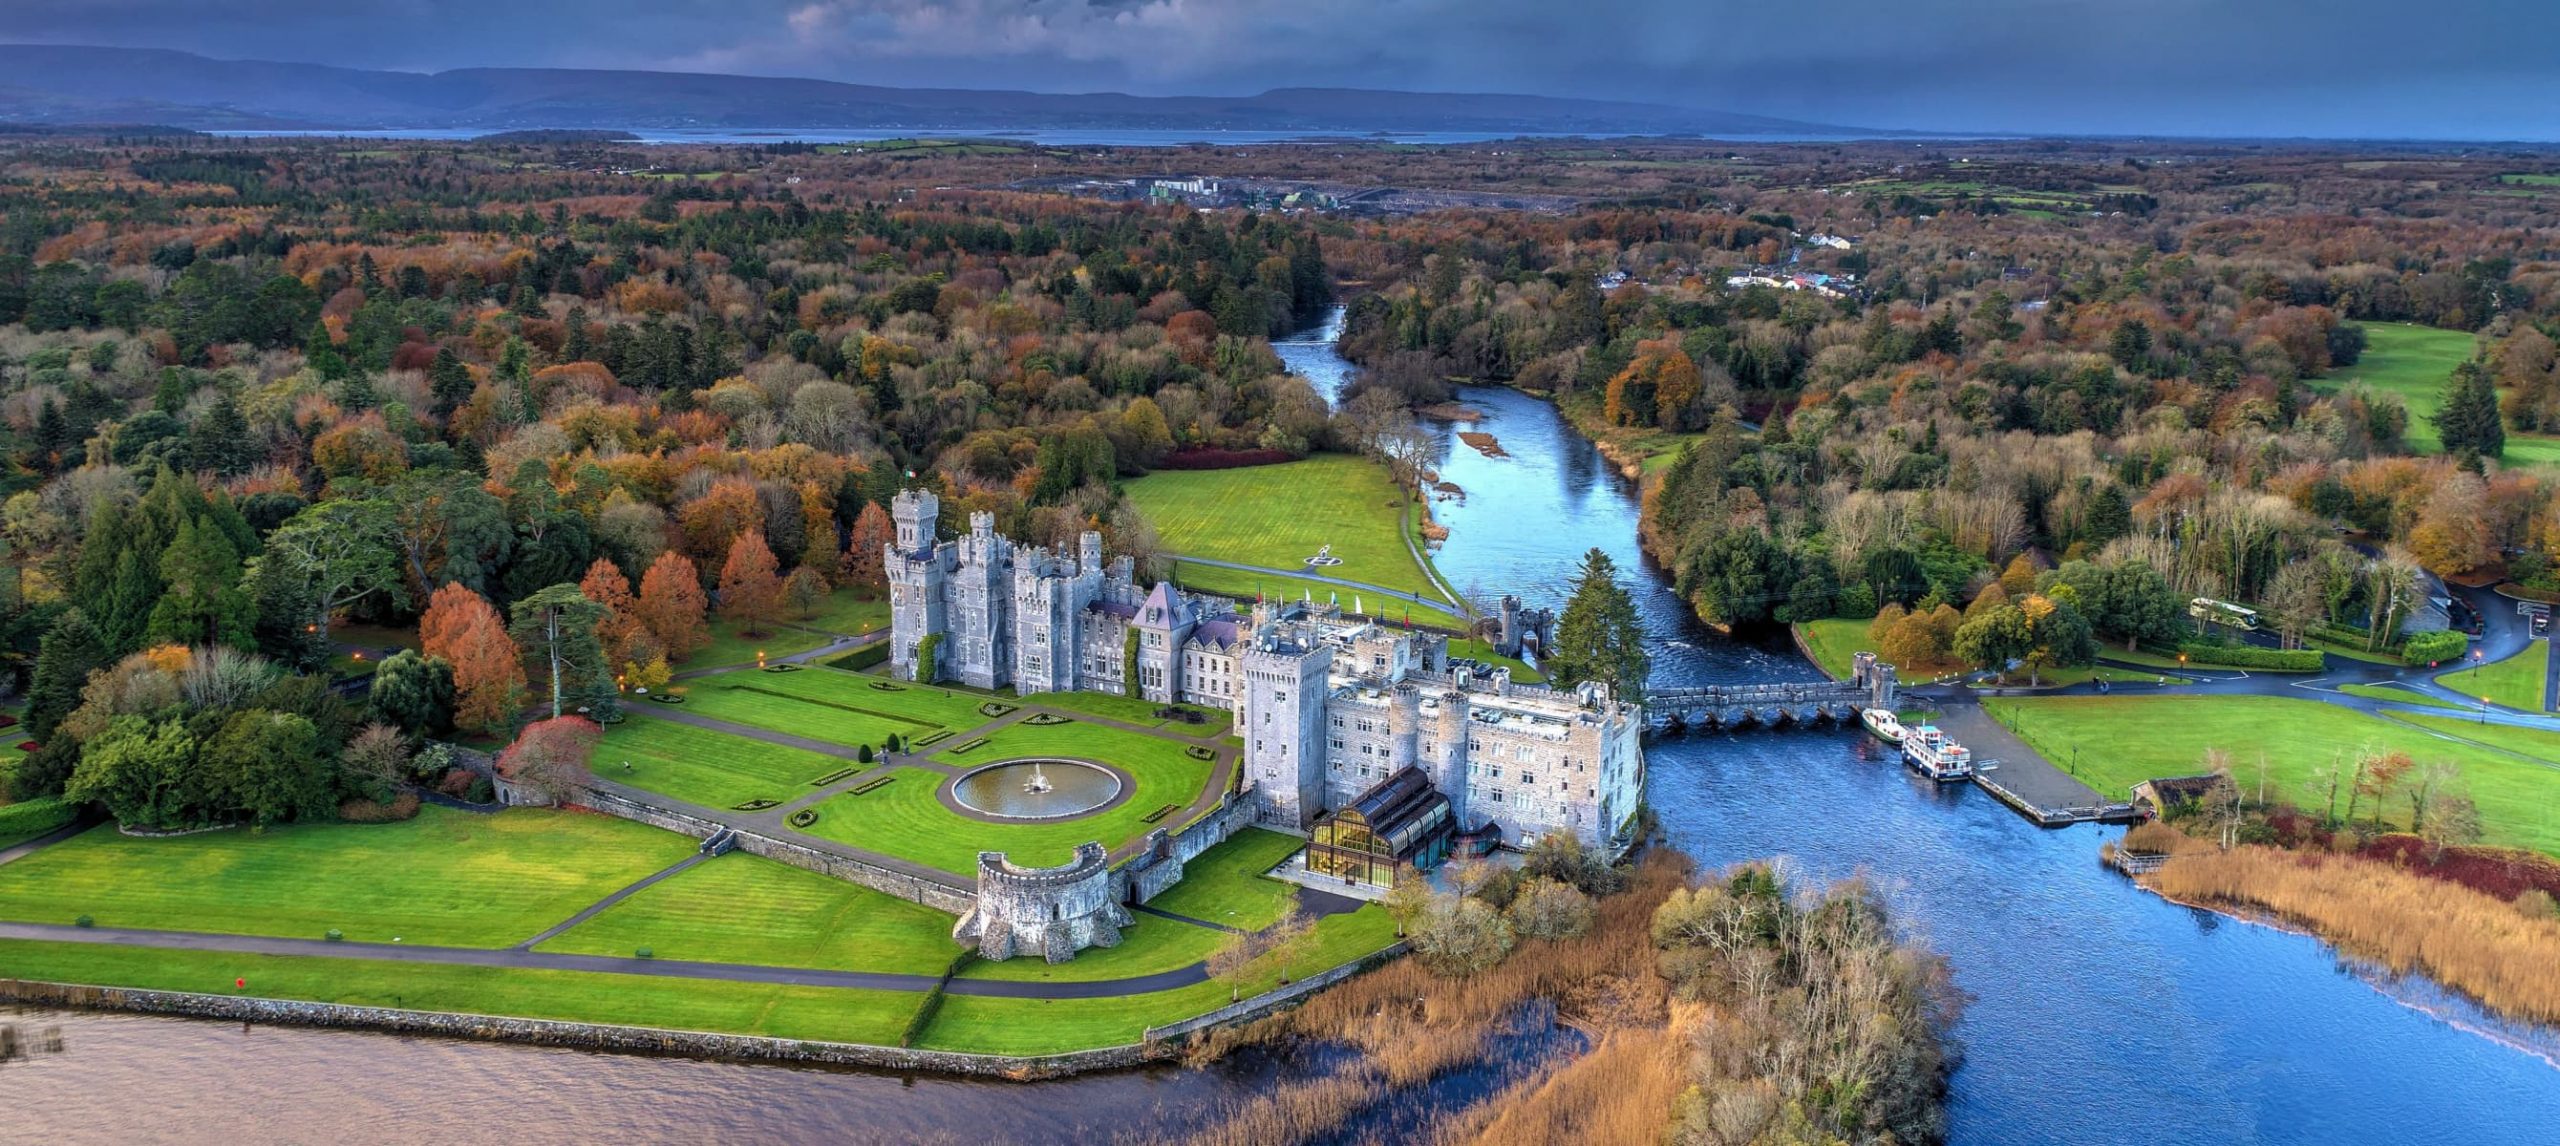 The 20 Most Spectacular Castles in Ireland